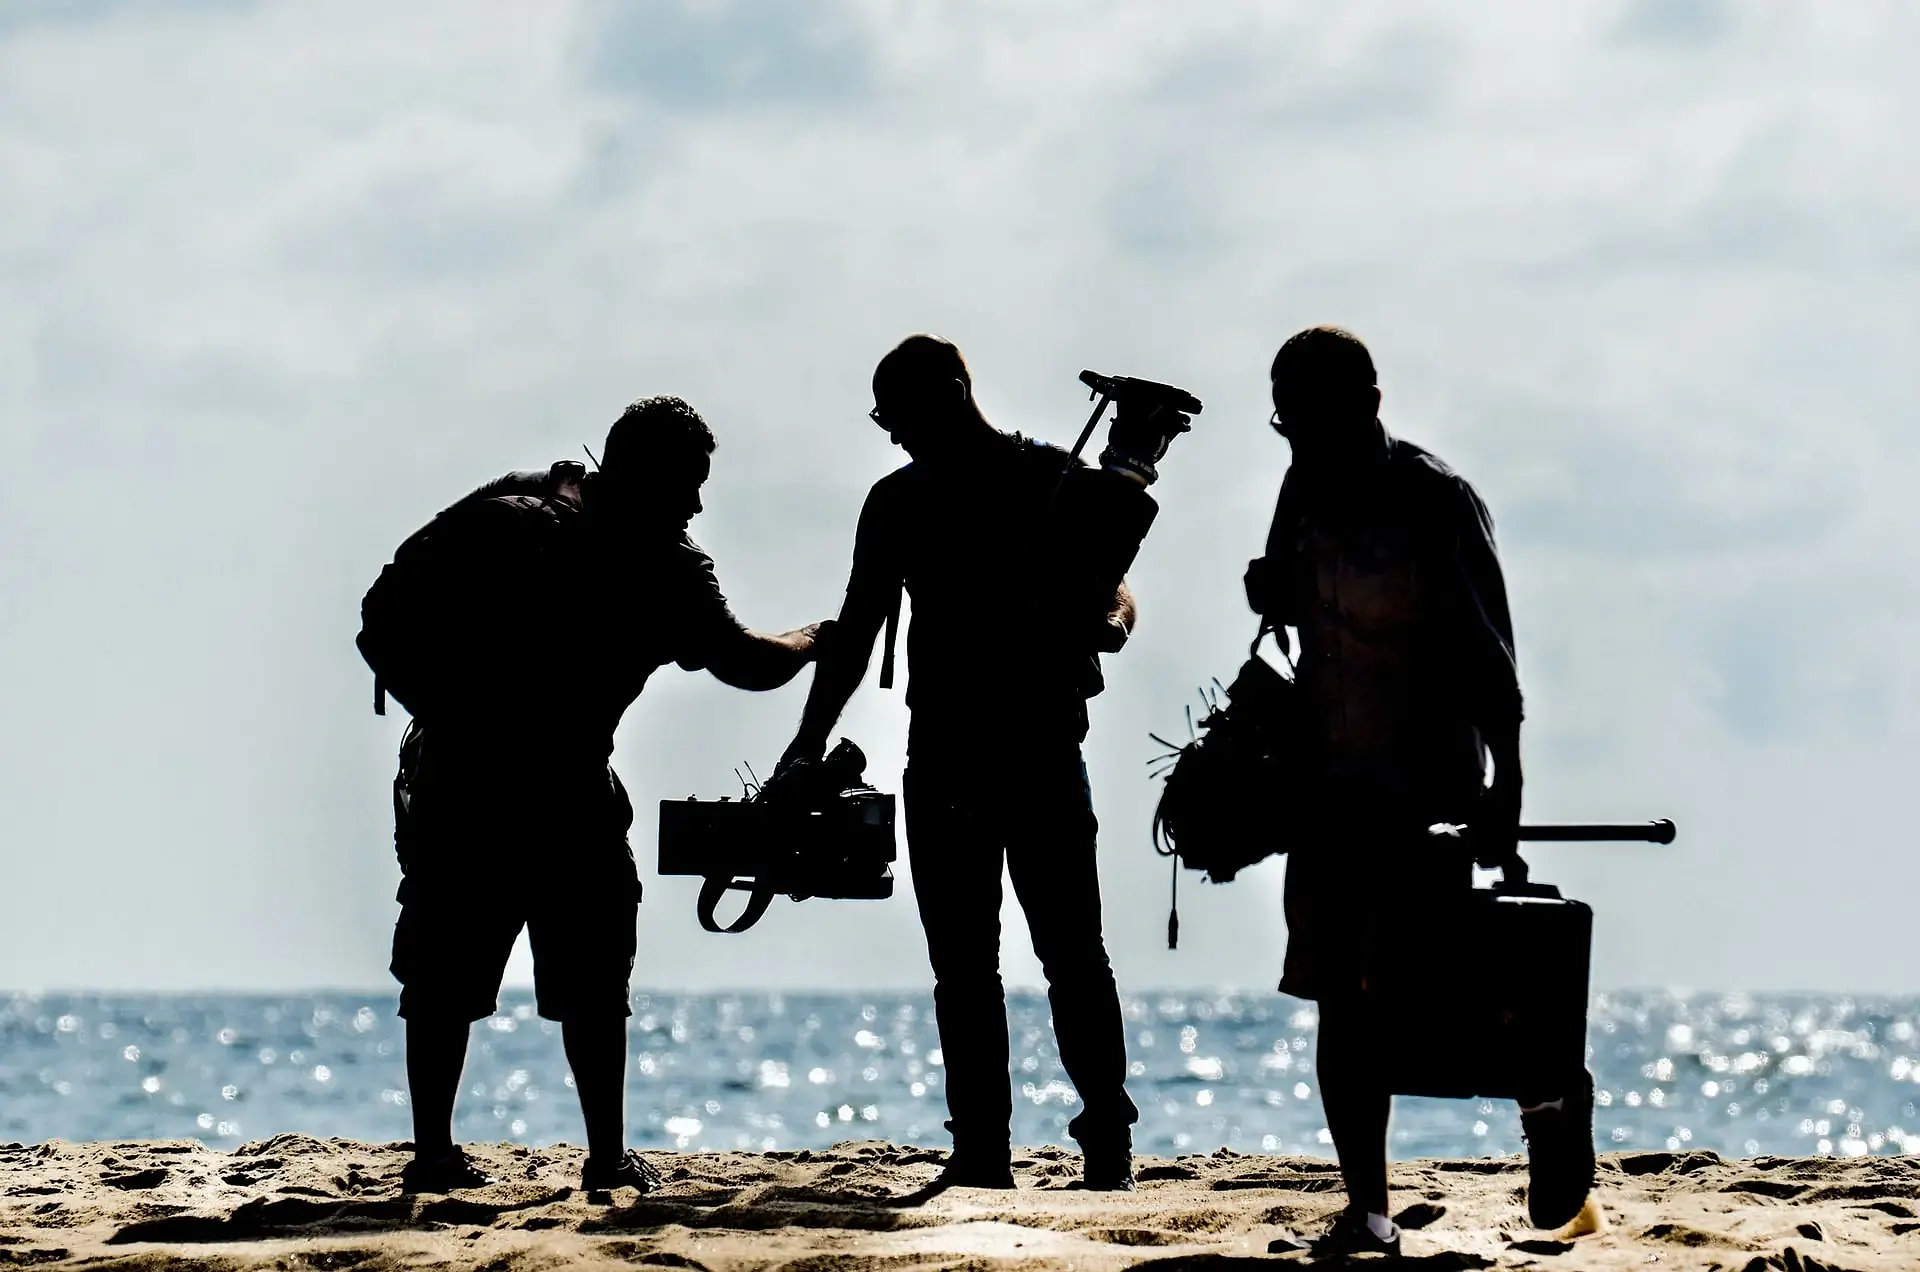 A group of video producers on the beach, shooting a corporate video.